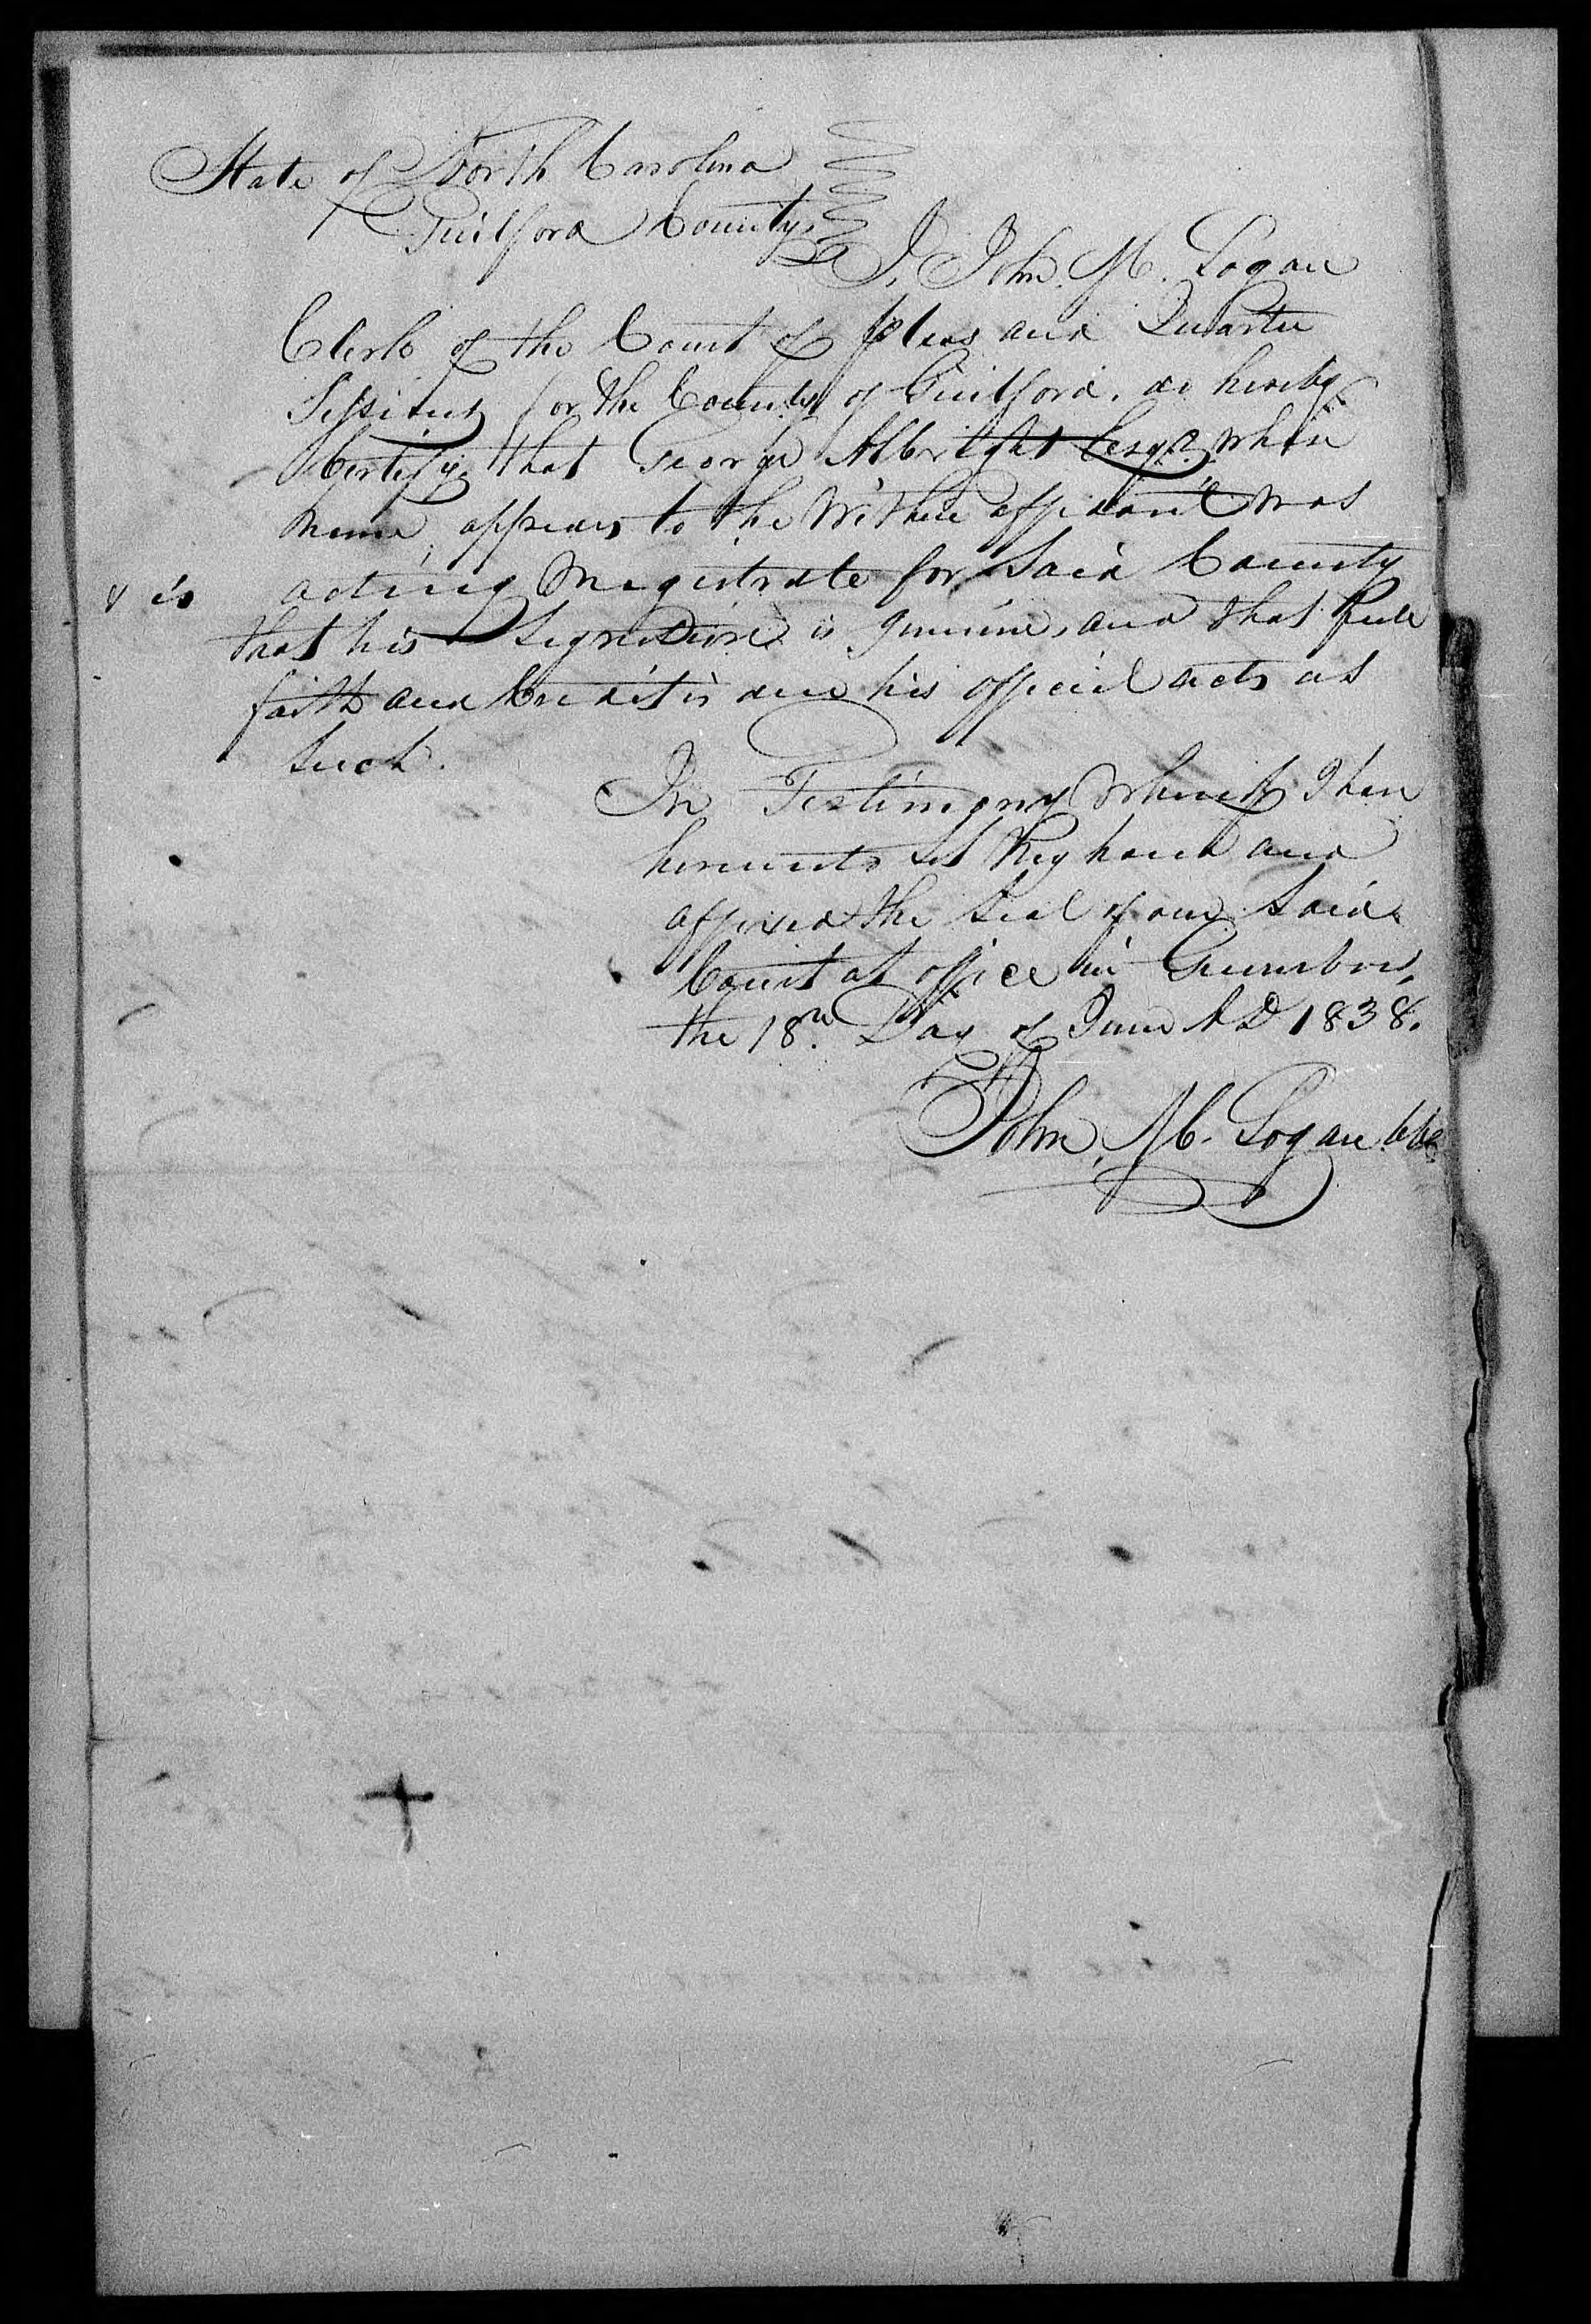 Affidavit of Laurence and Martha Pettiford in support of a Pension Claim for Rachel Locus, 18 June 1838, page 2